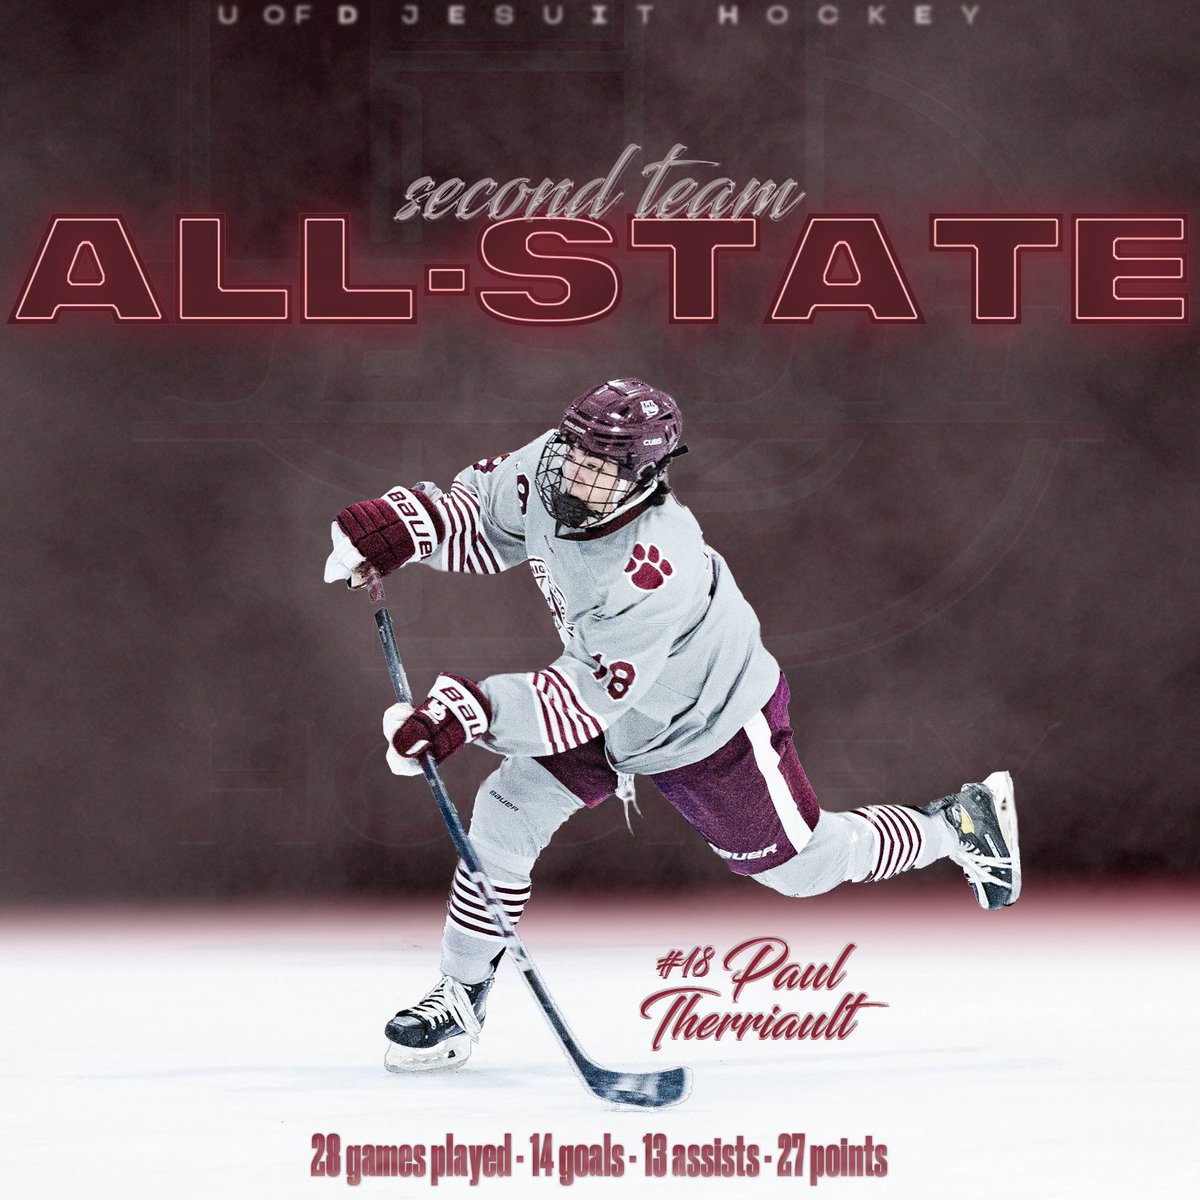 Congratulations to @UDJHockey Senior Forward Paul Therrilault on being selected 2nd Team All State! #AMDG